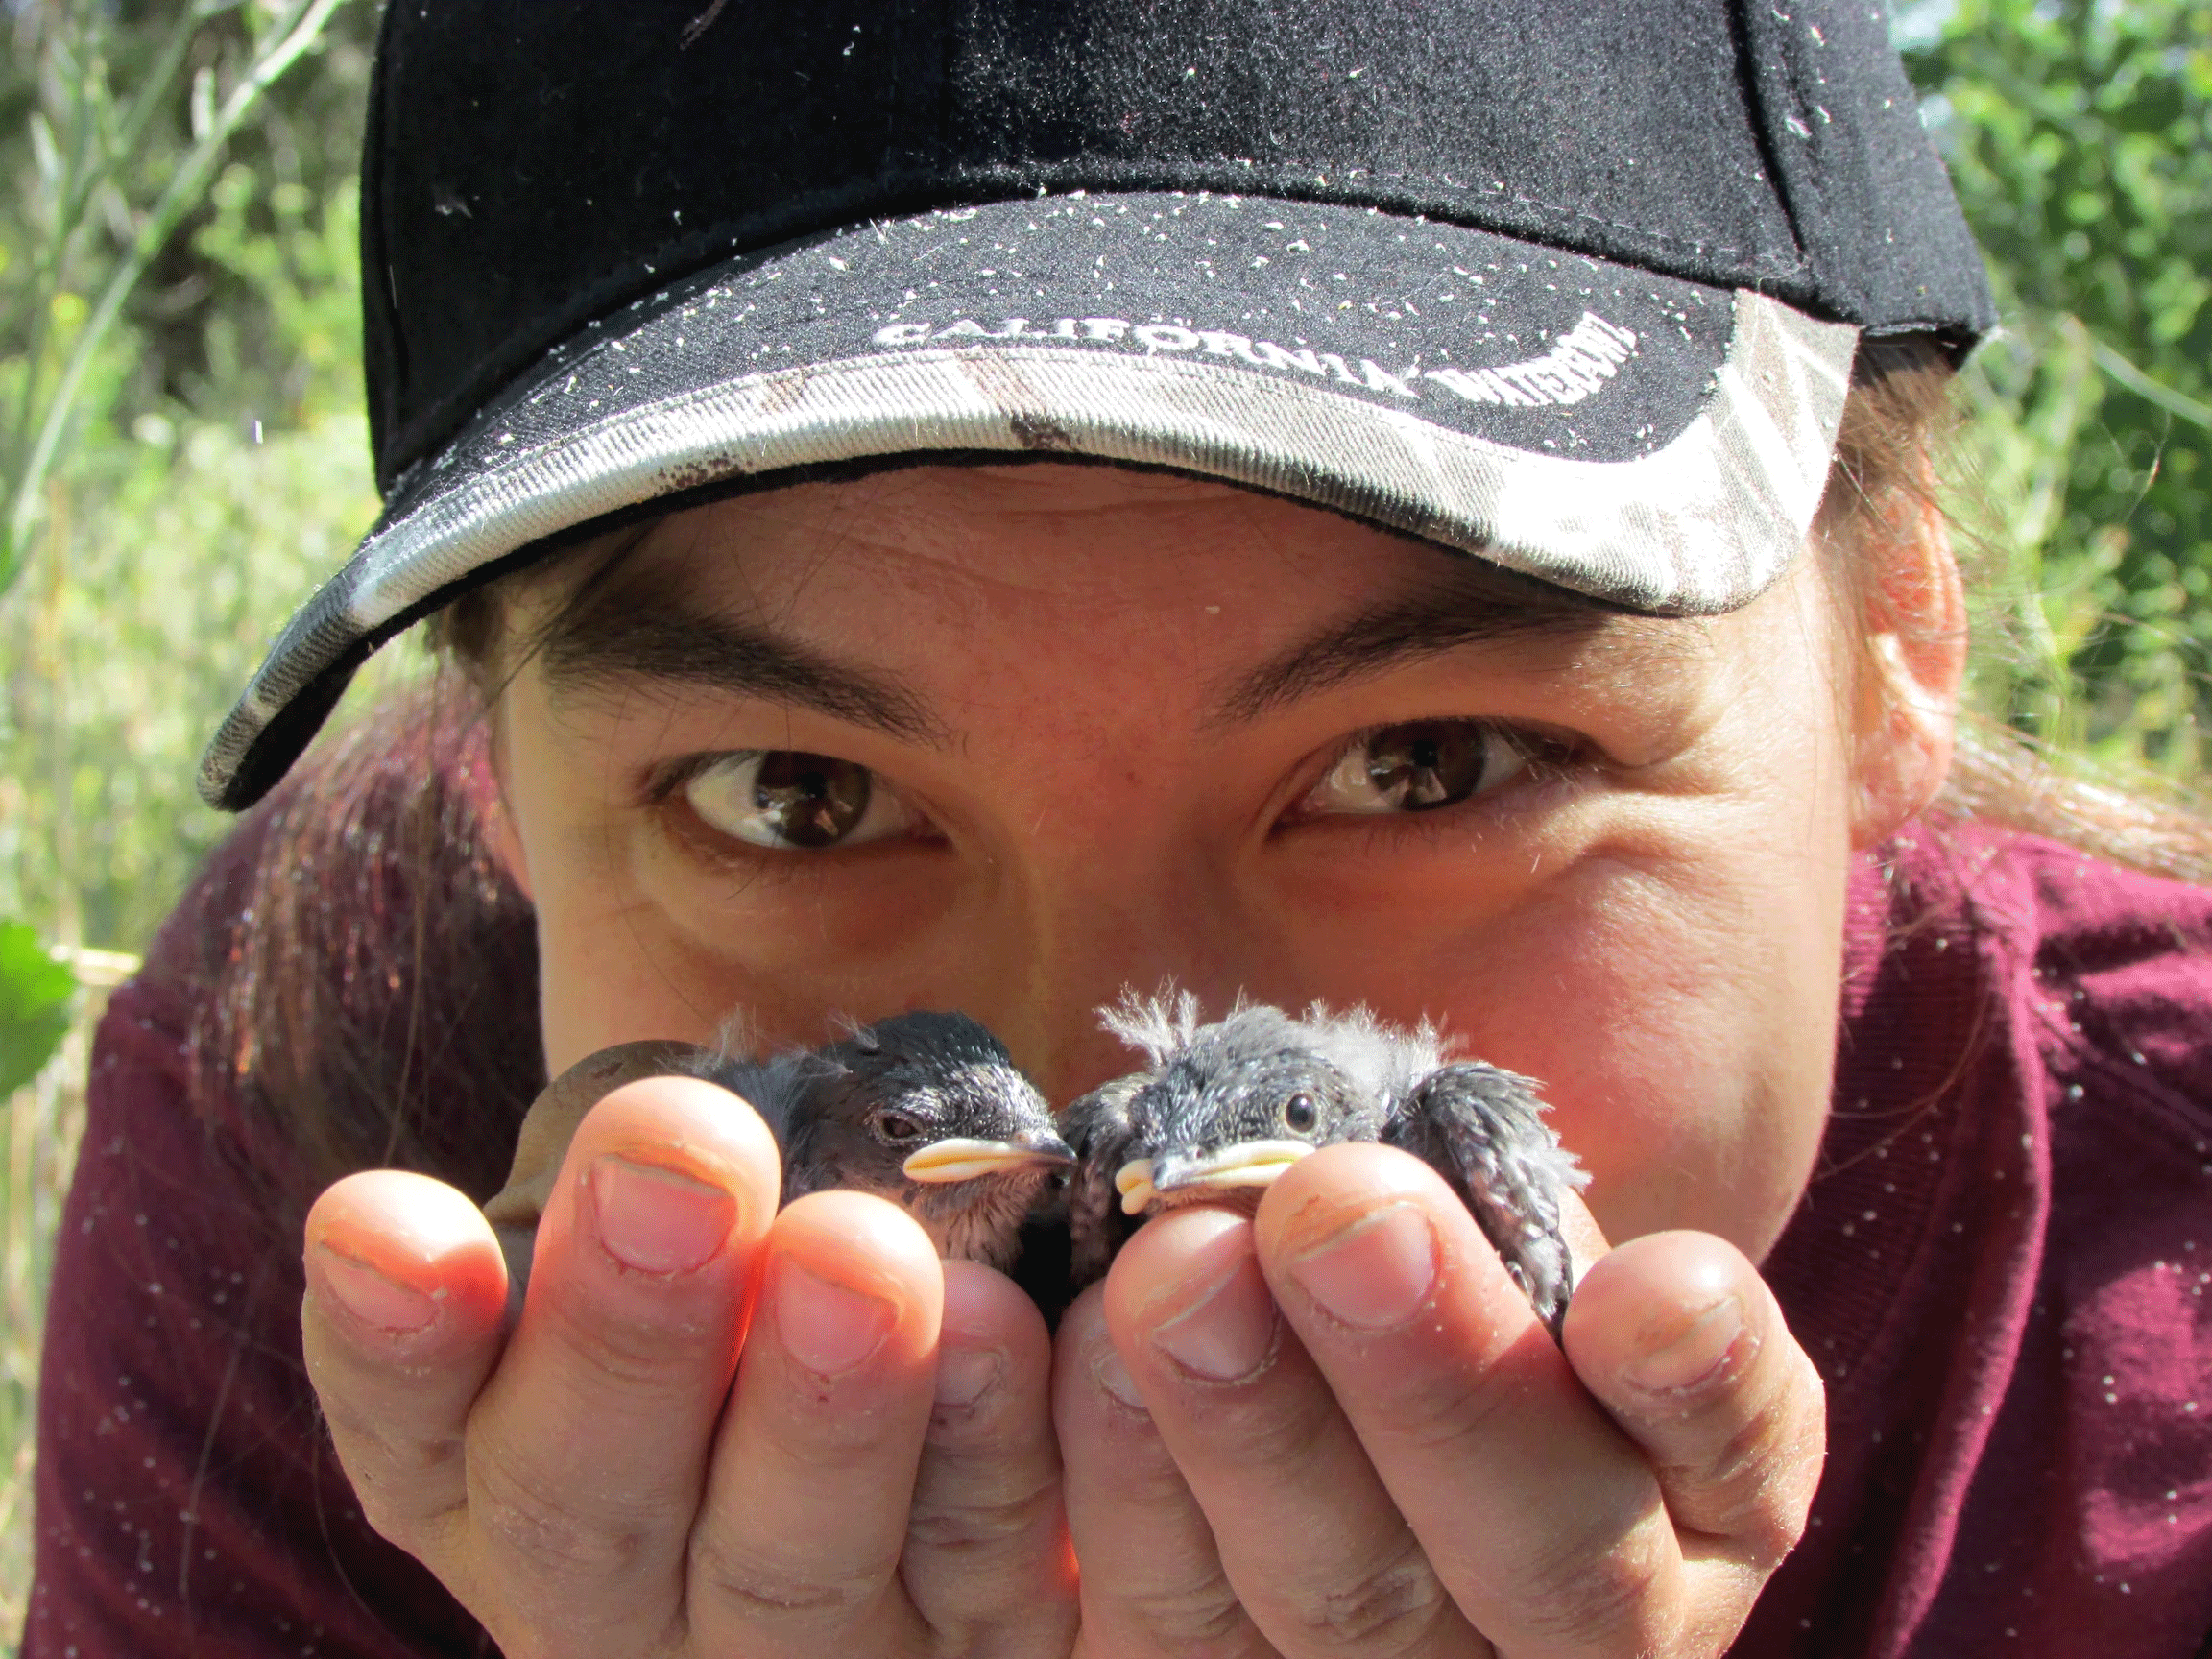 Student Karen Sinclair holds a "bouquet" of tree swallow nestlings at UC Davis Russell Ranch in June 2015.